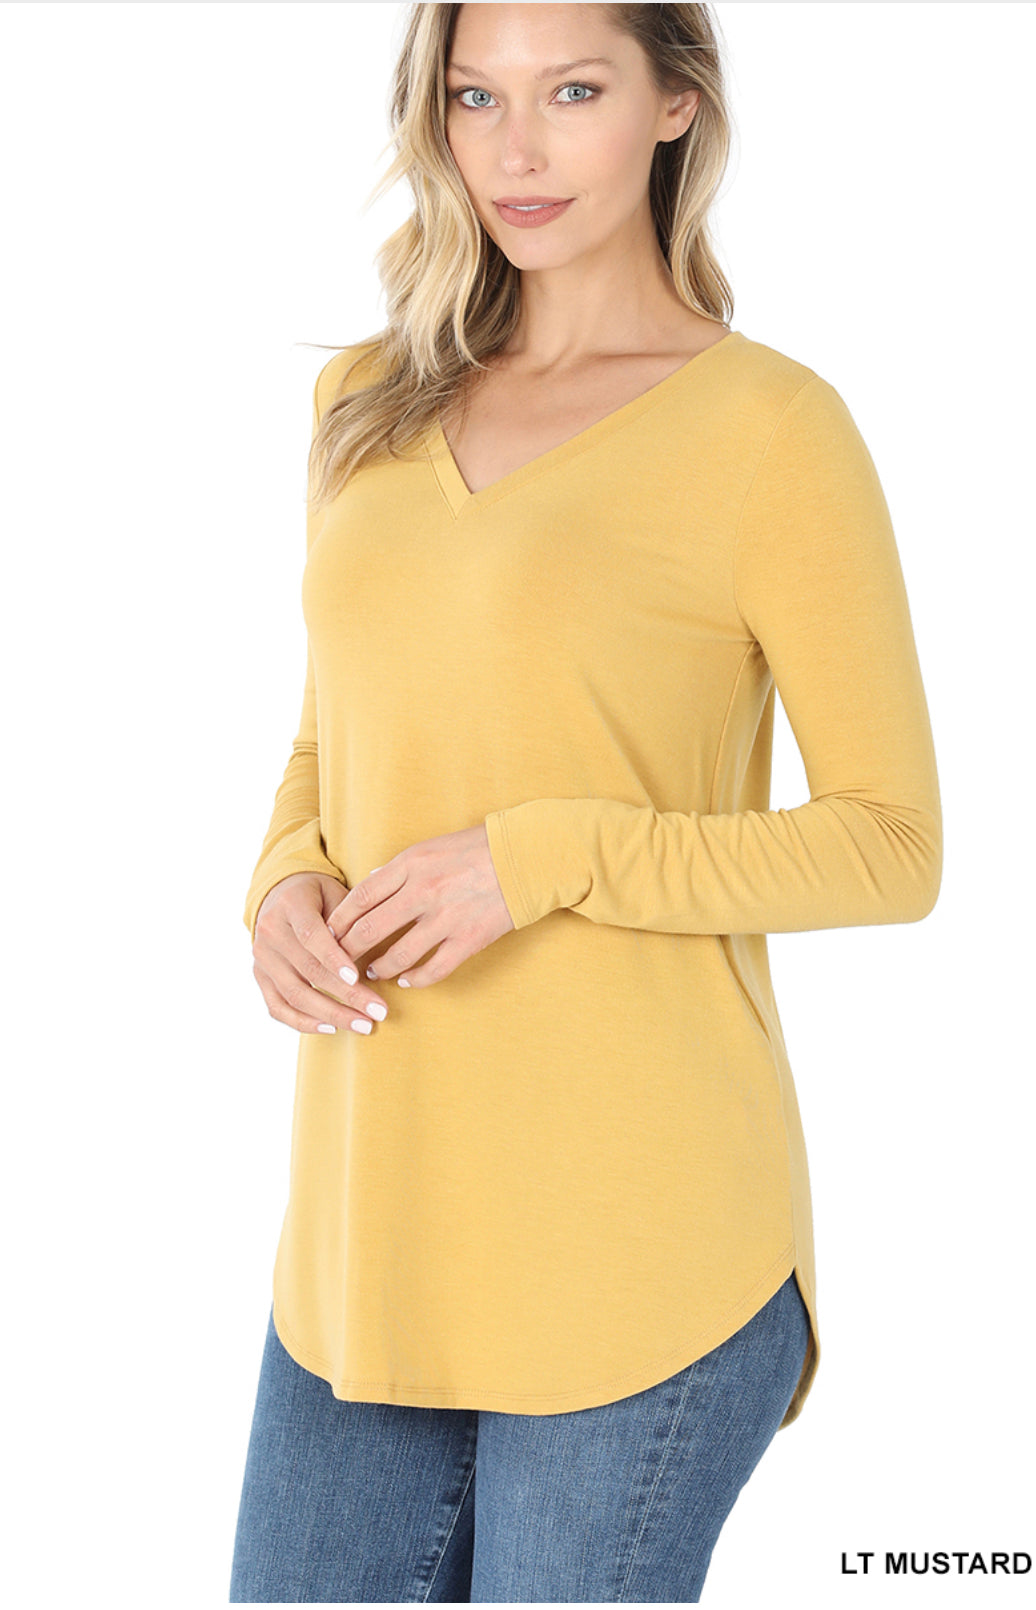 Best Ever Long Sleeve Top/ Round Neck